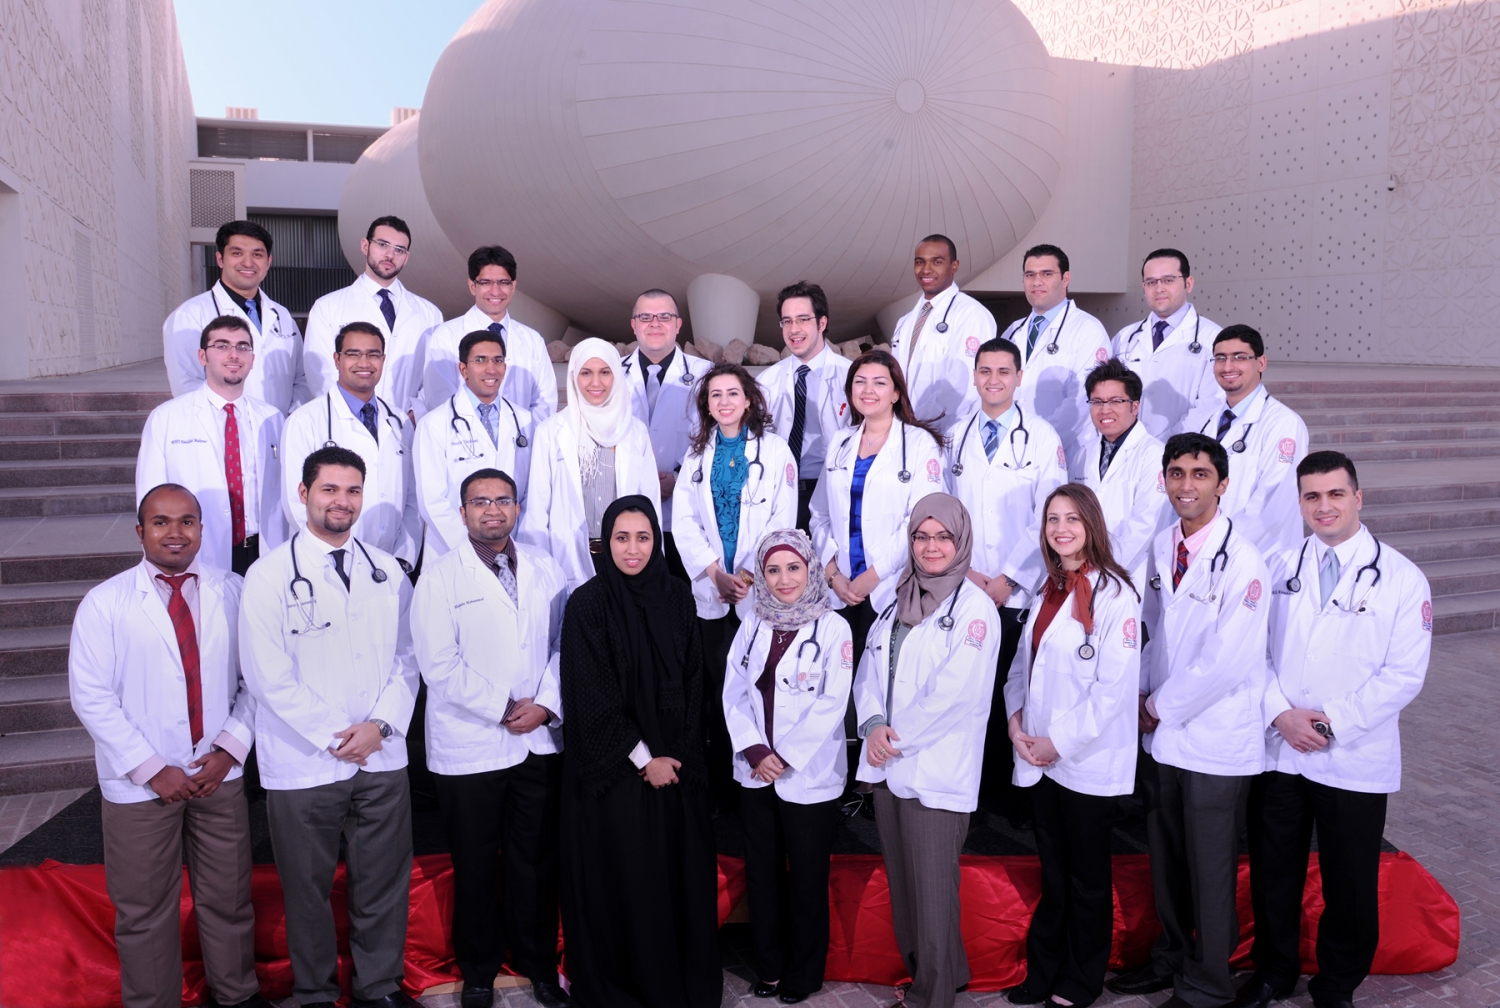 Weill Cornell Medical College in Qatar Honors the Graduating Class of 2012  | Newsroom | Weill Cornell Medicine